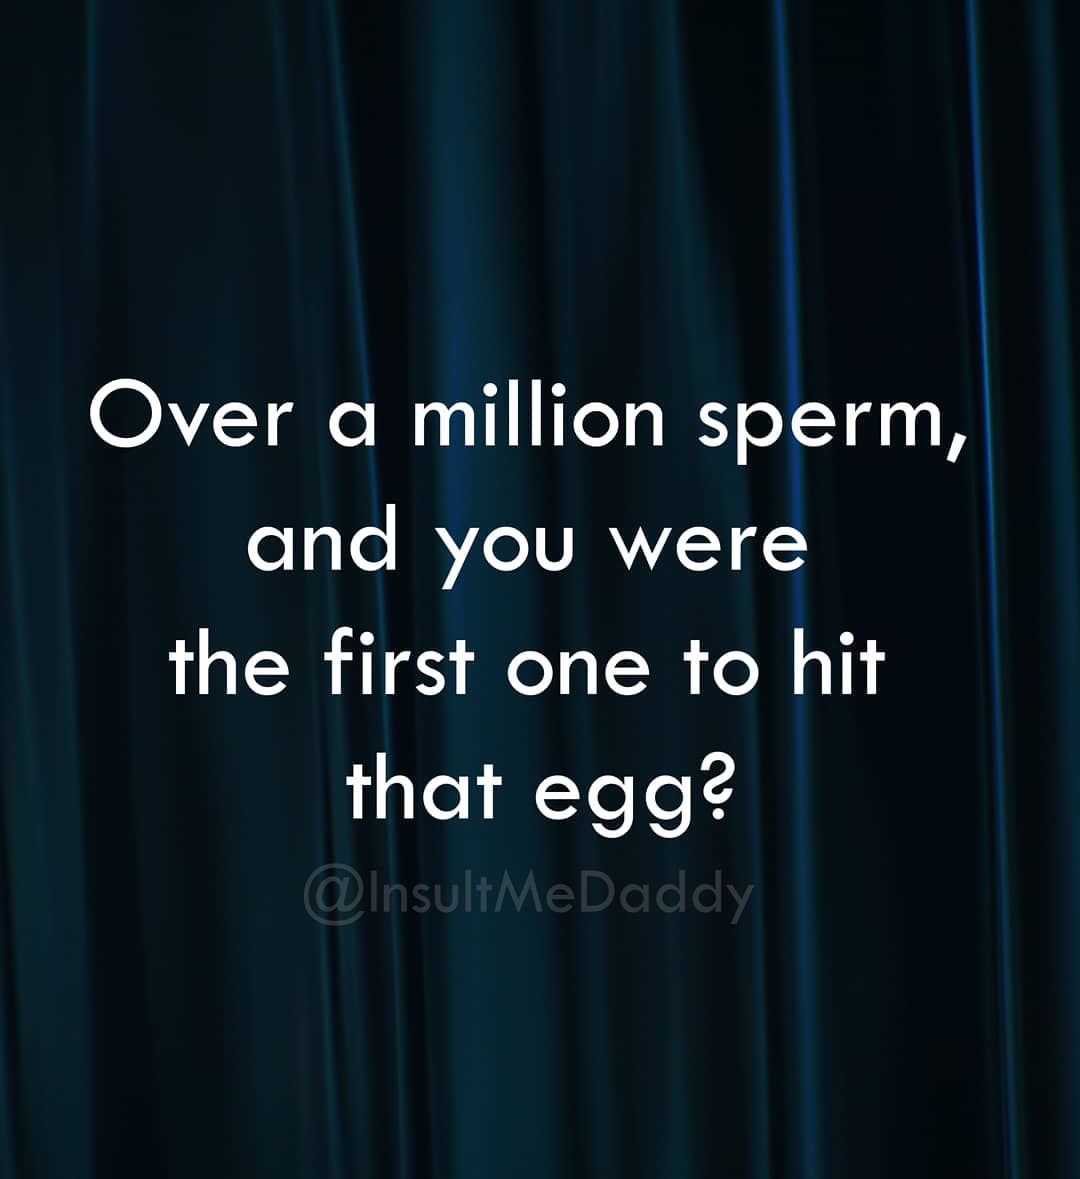 presentation - Over a million sperm, and you were the first one to hit that egg?